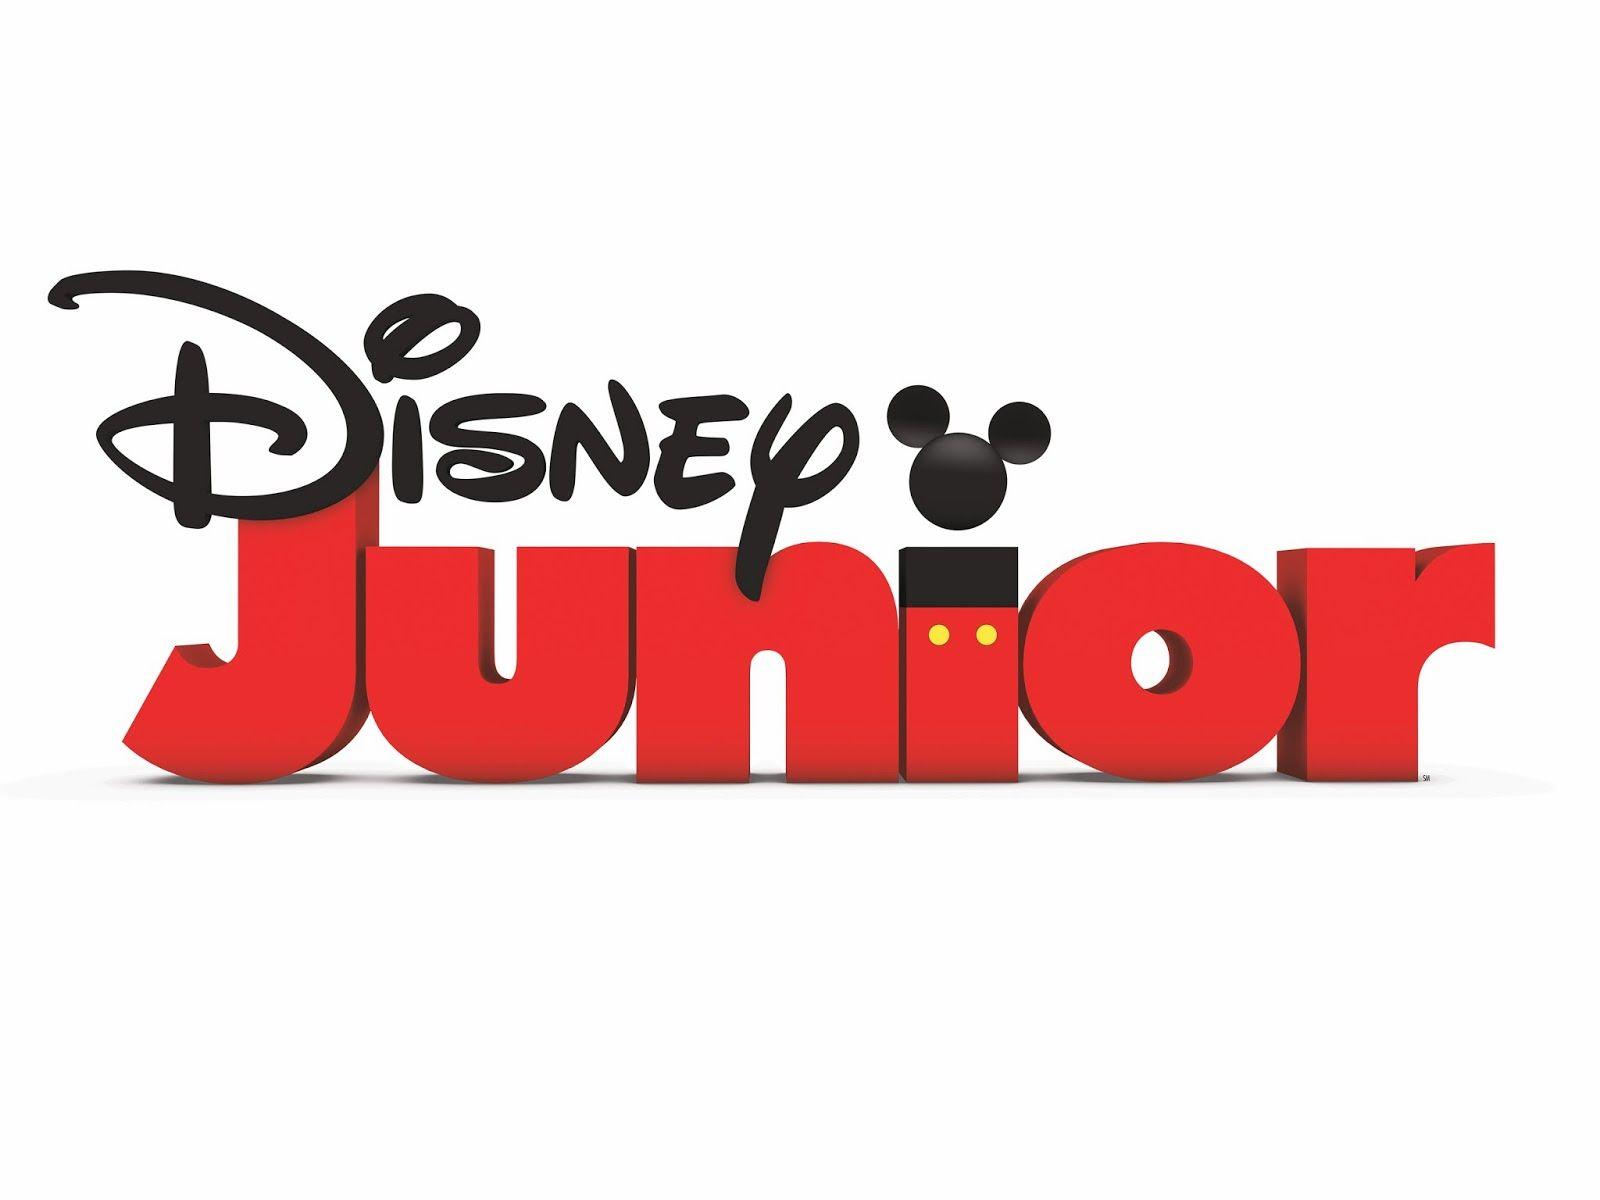 Disney Junior the Channel Logo - Mickey Mutineers: A Use For Late Night Disney Junior Channel